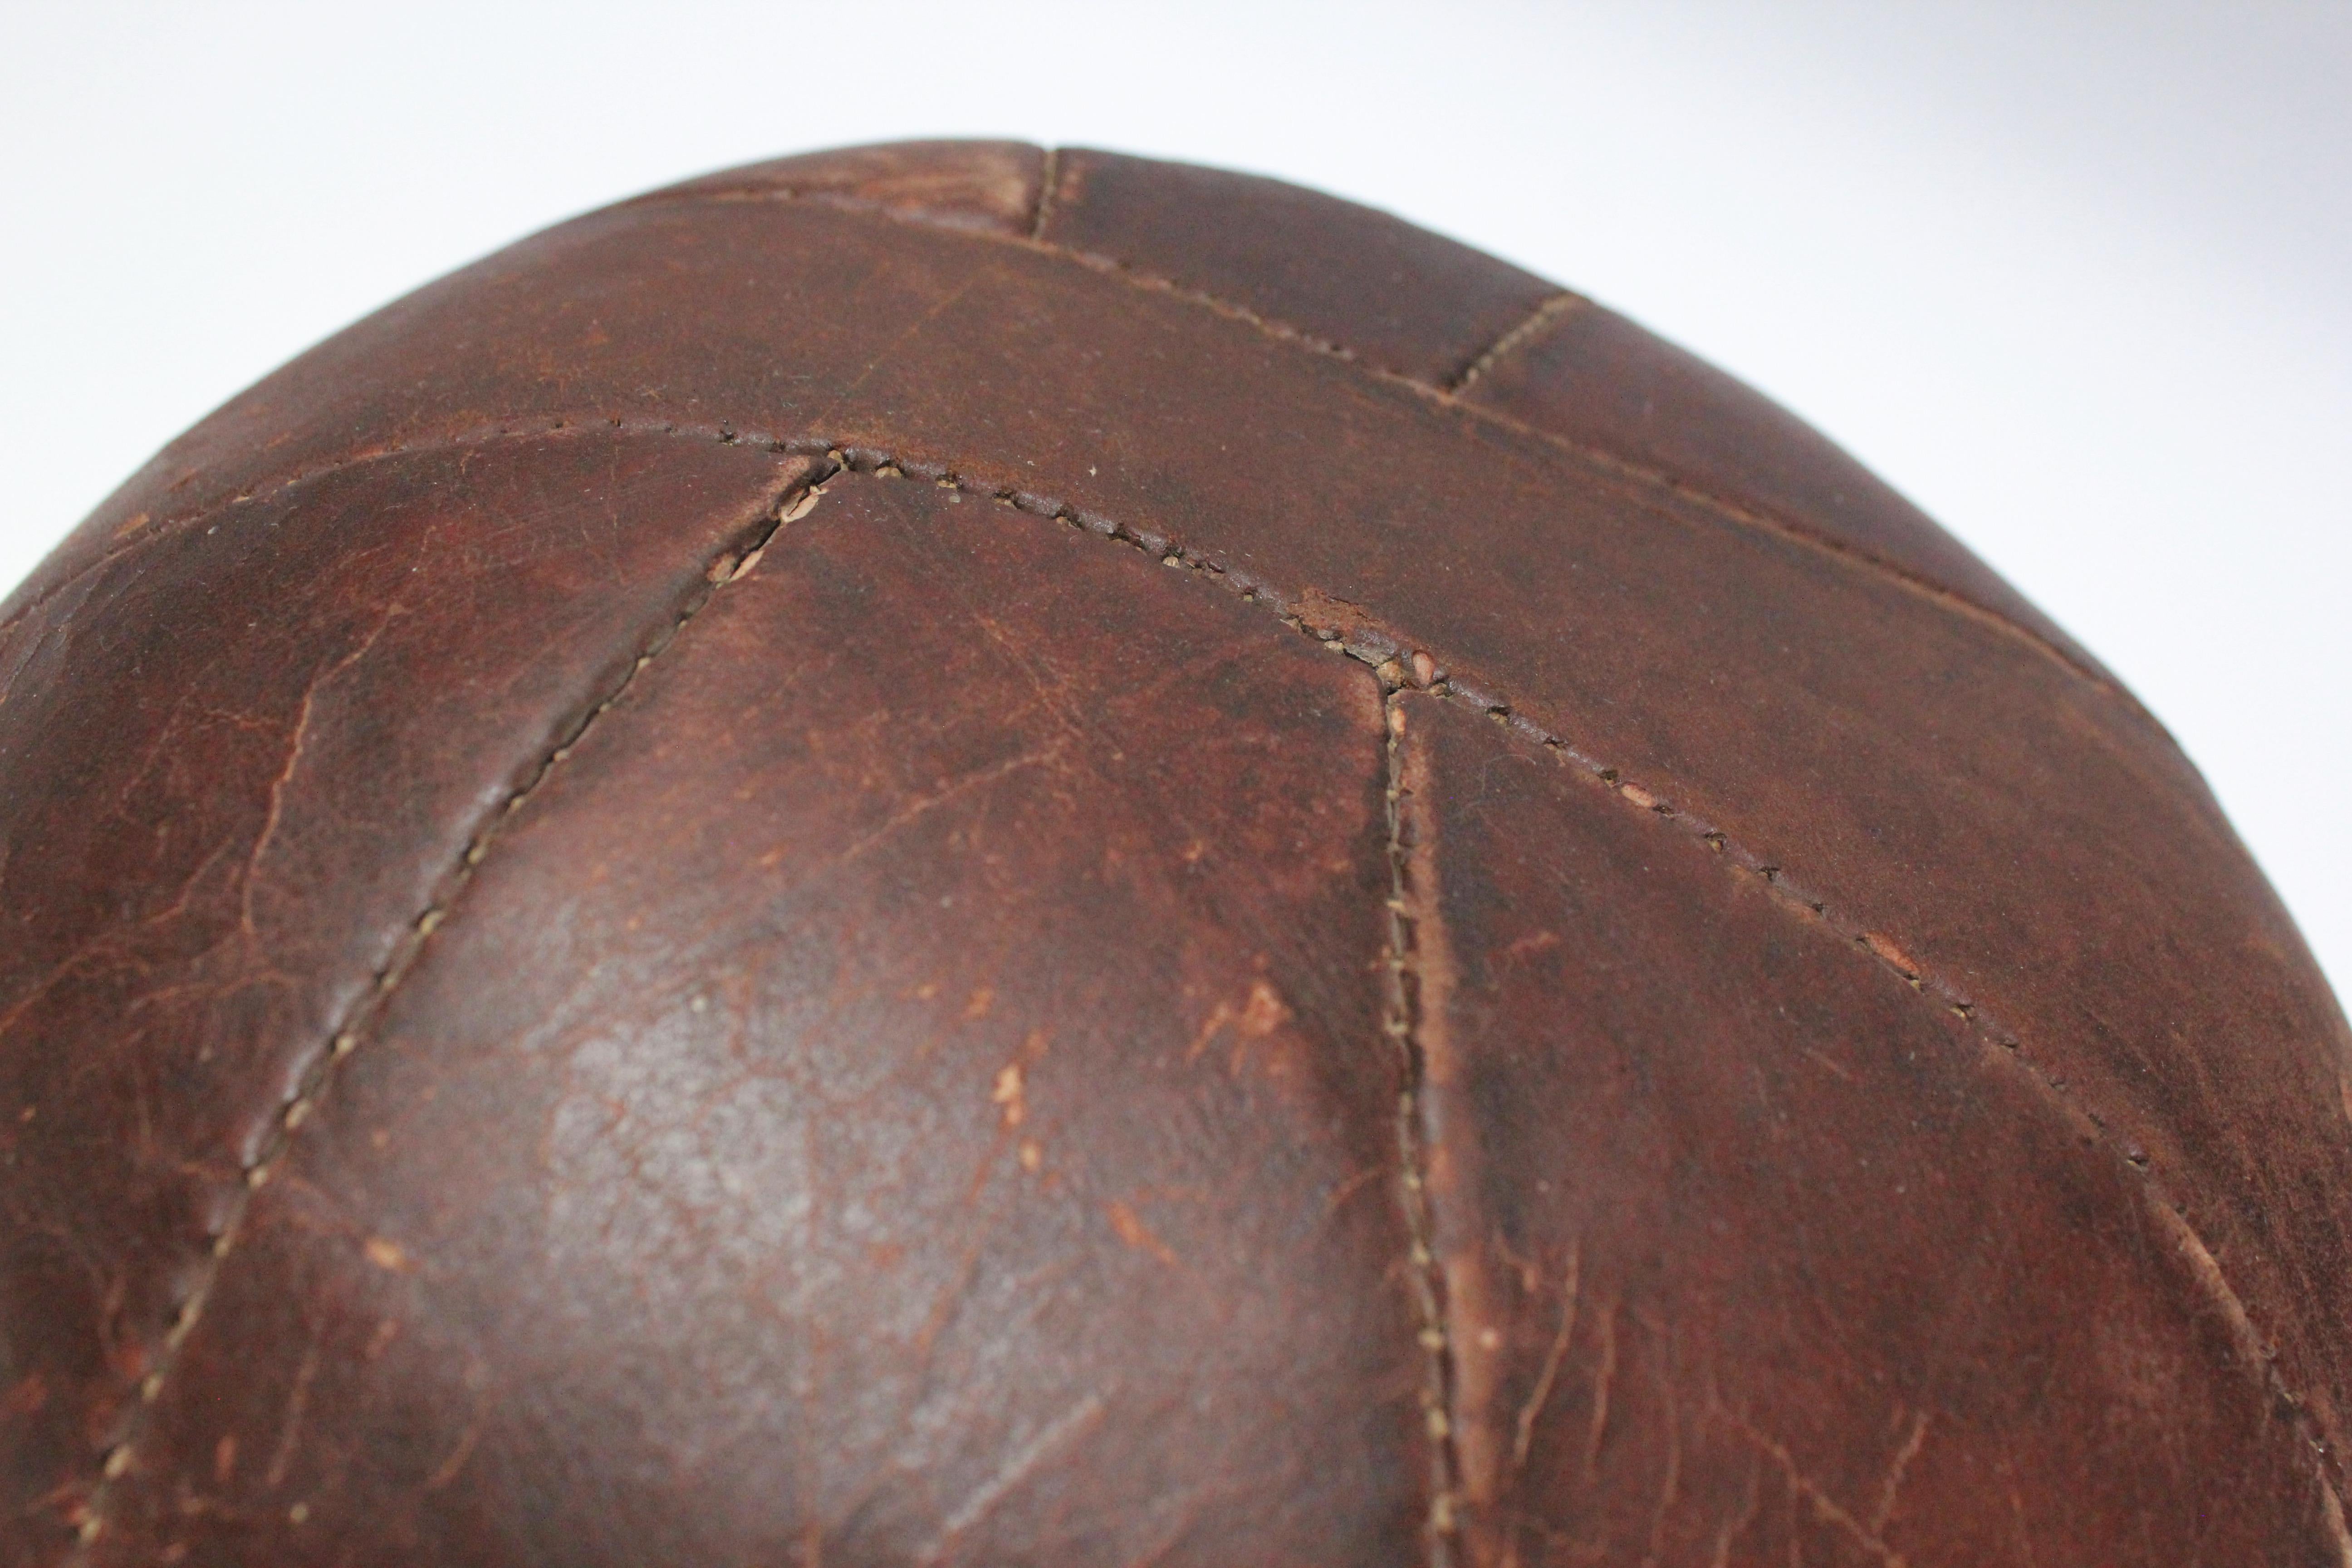 Vintage Hand-Stitched Four Pound Leather Medicine Ball 3